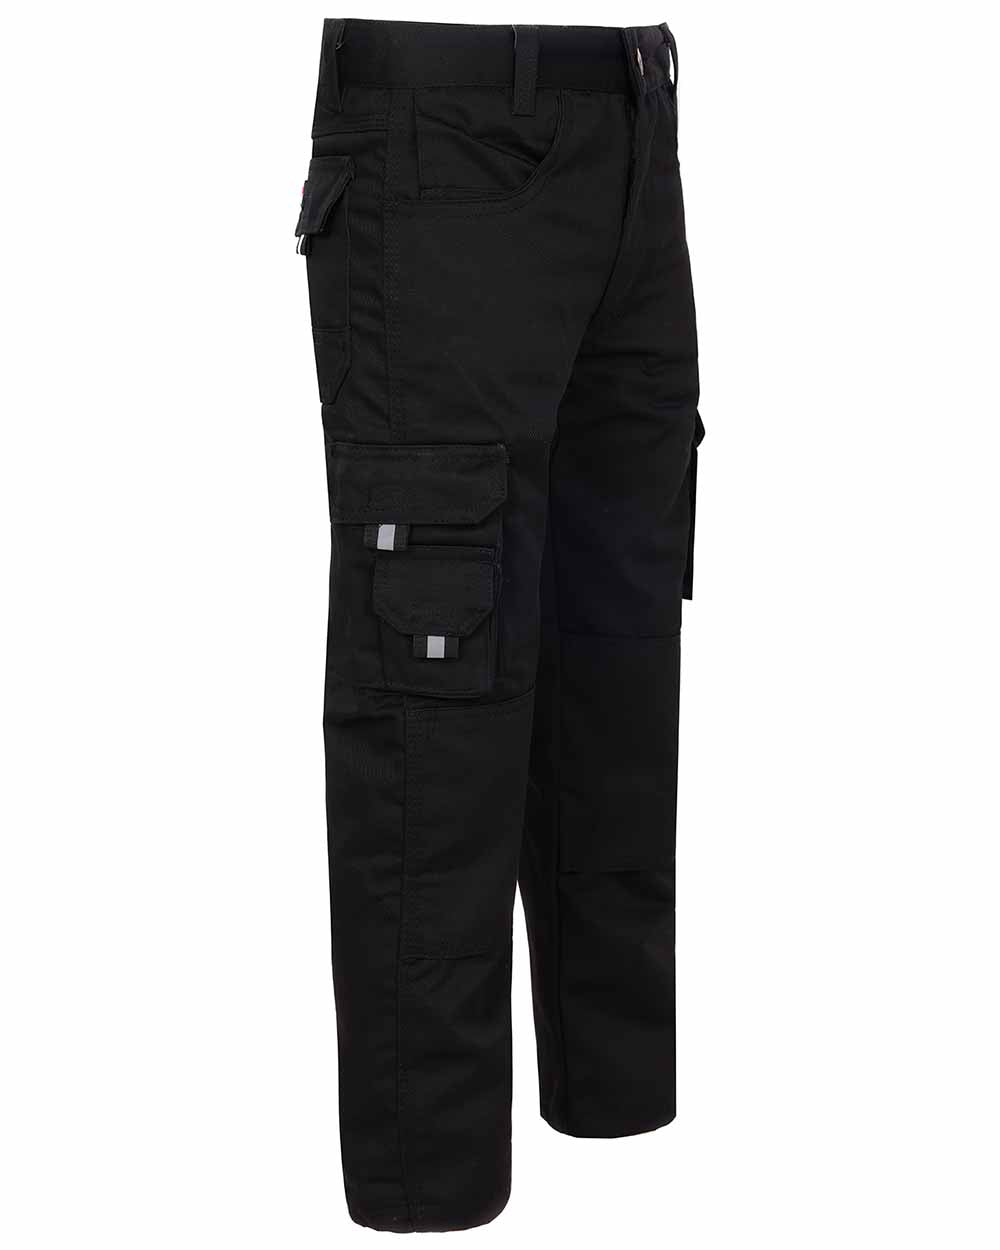 Side view showing cargo pocket TuffStuff Junior Pro Work Trousers in Black 